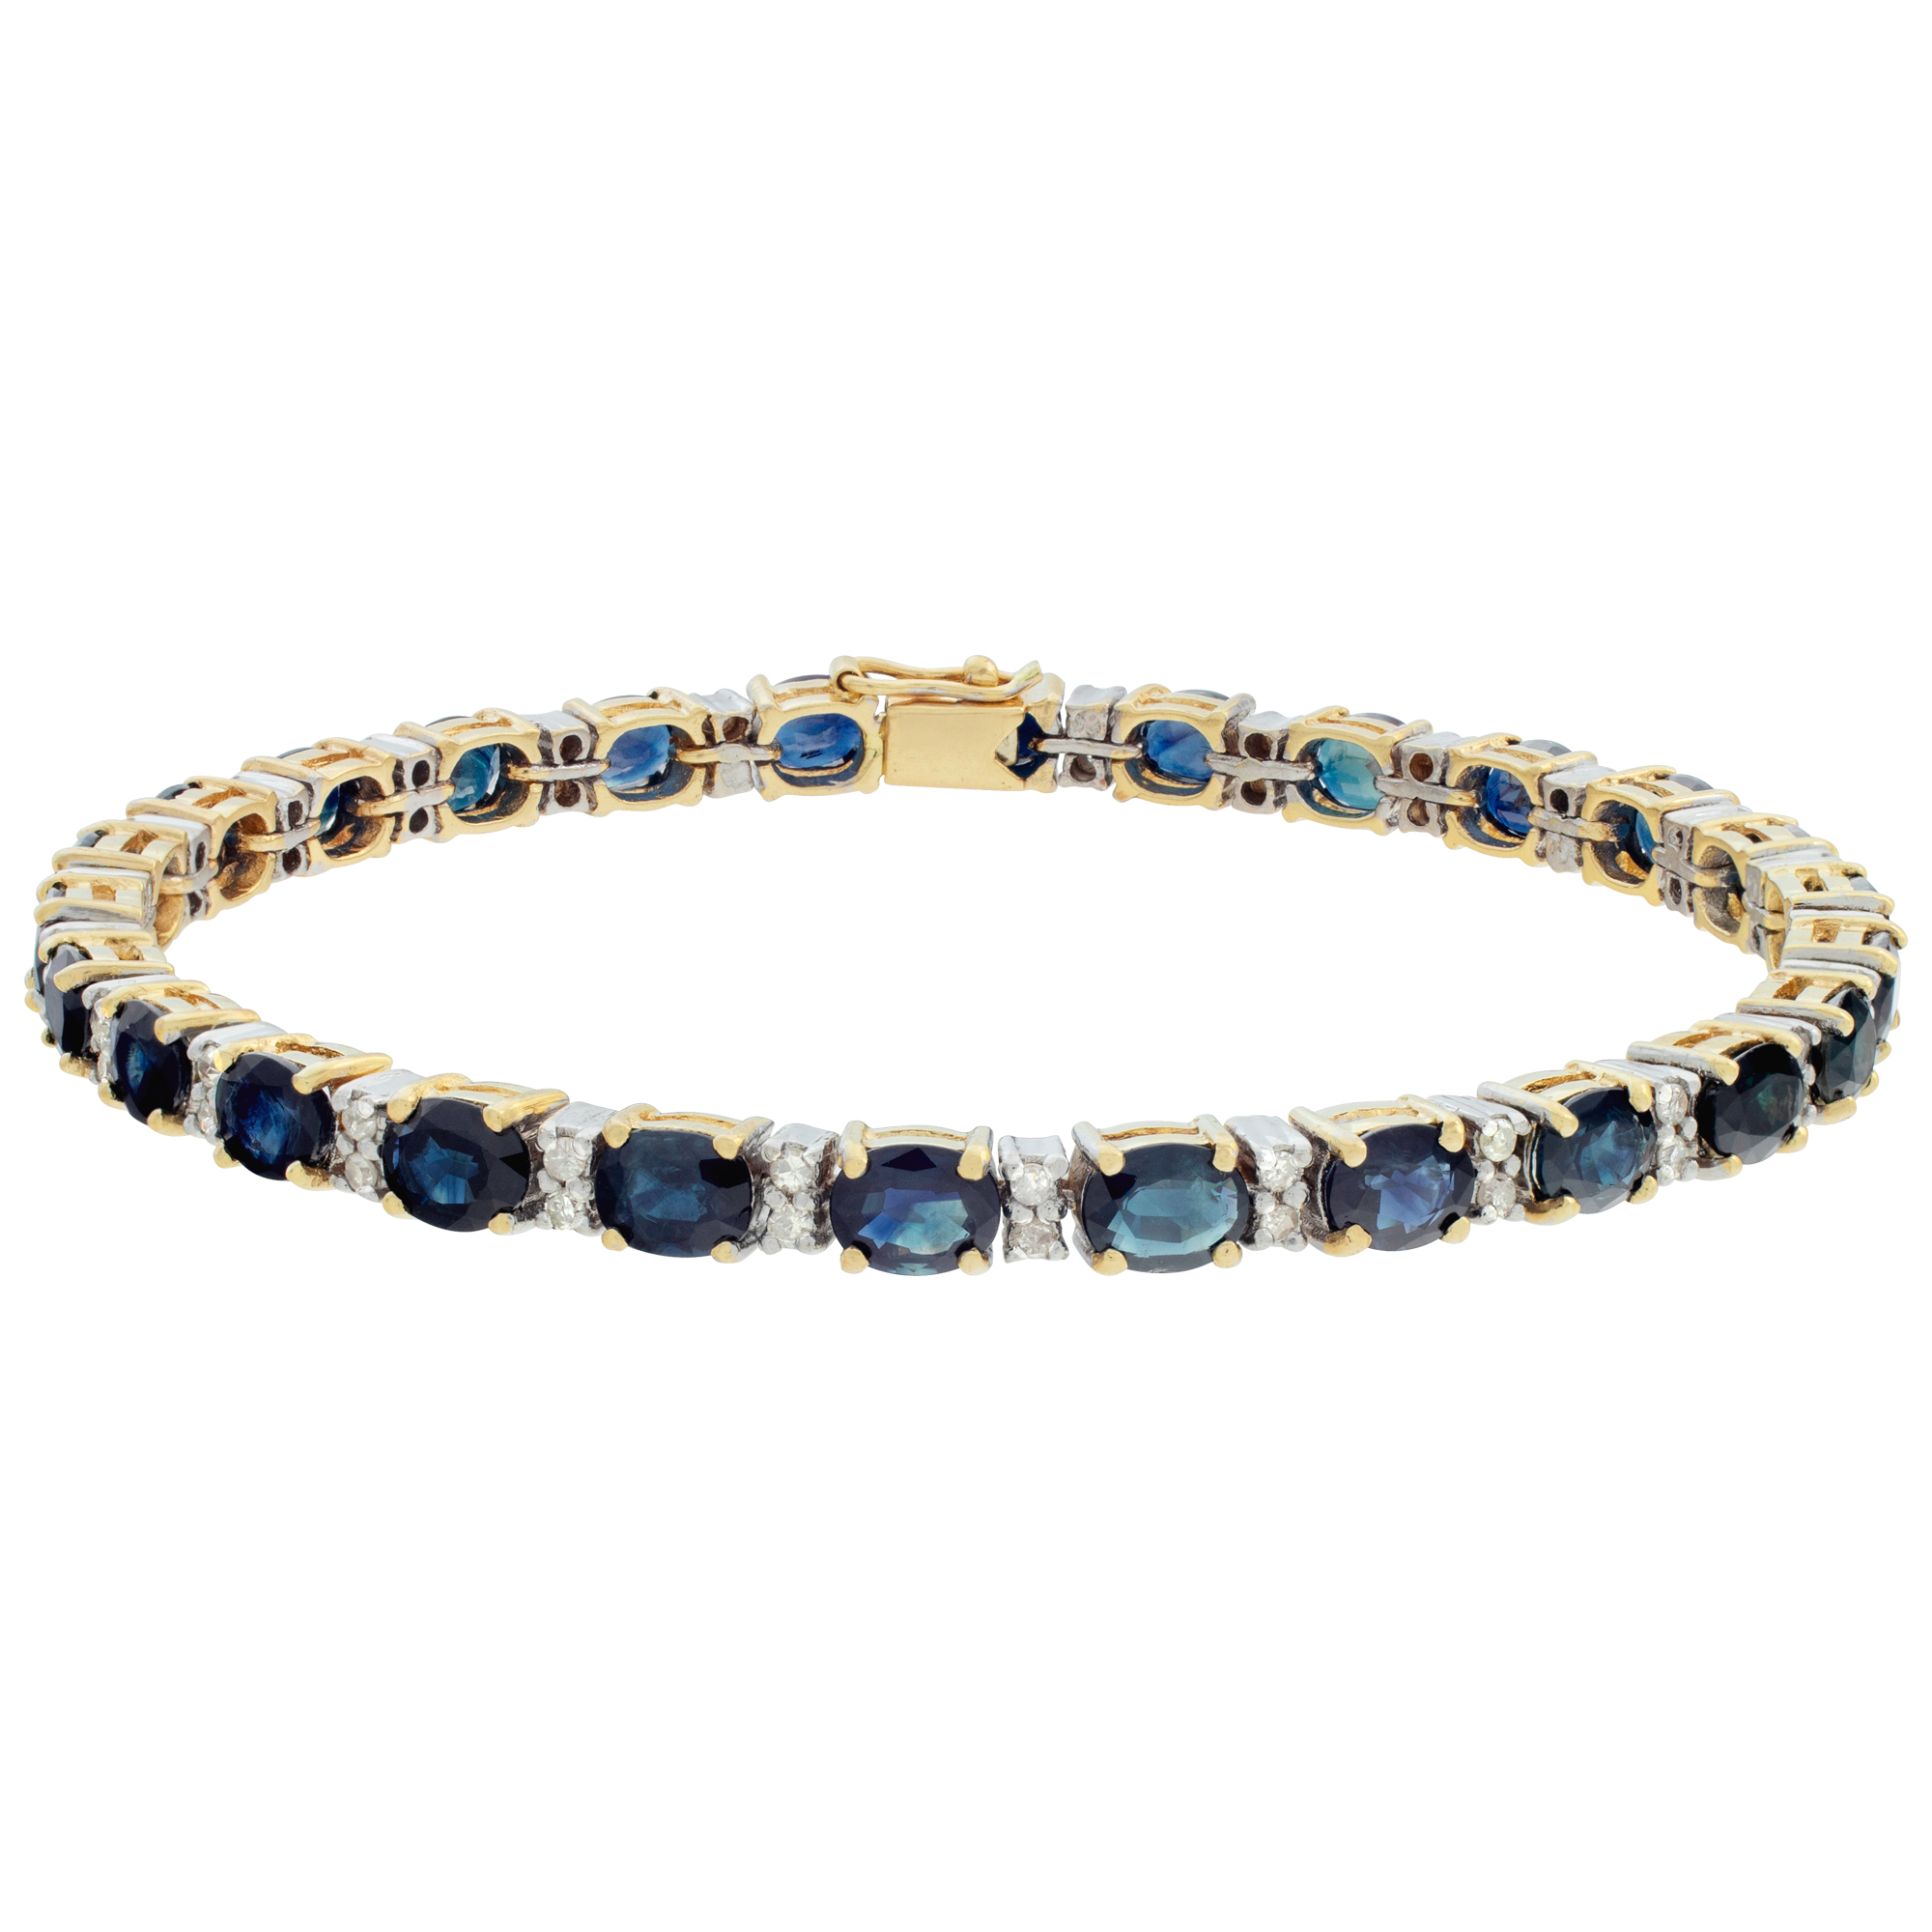 Oval cut sapphires, total approx. weight 12 carats and round diamonds line bracelet in 14k yellow gold